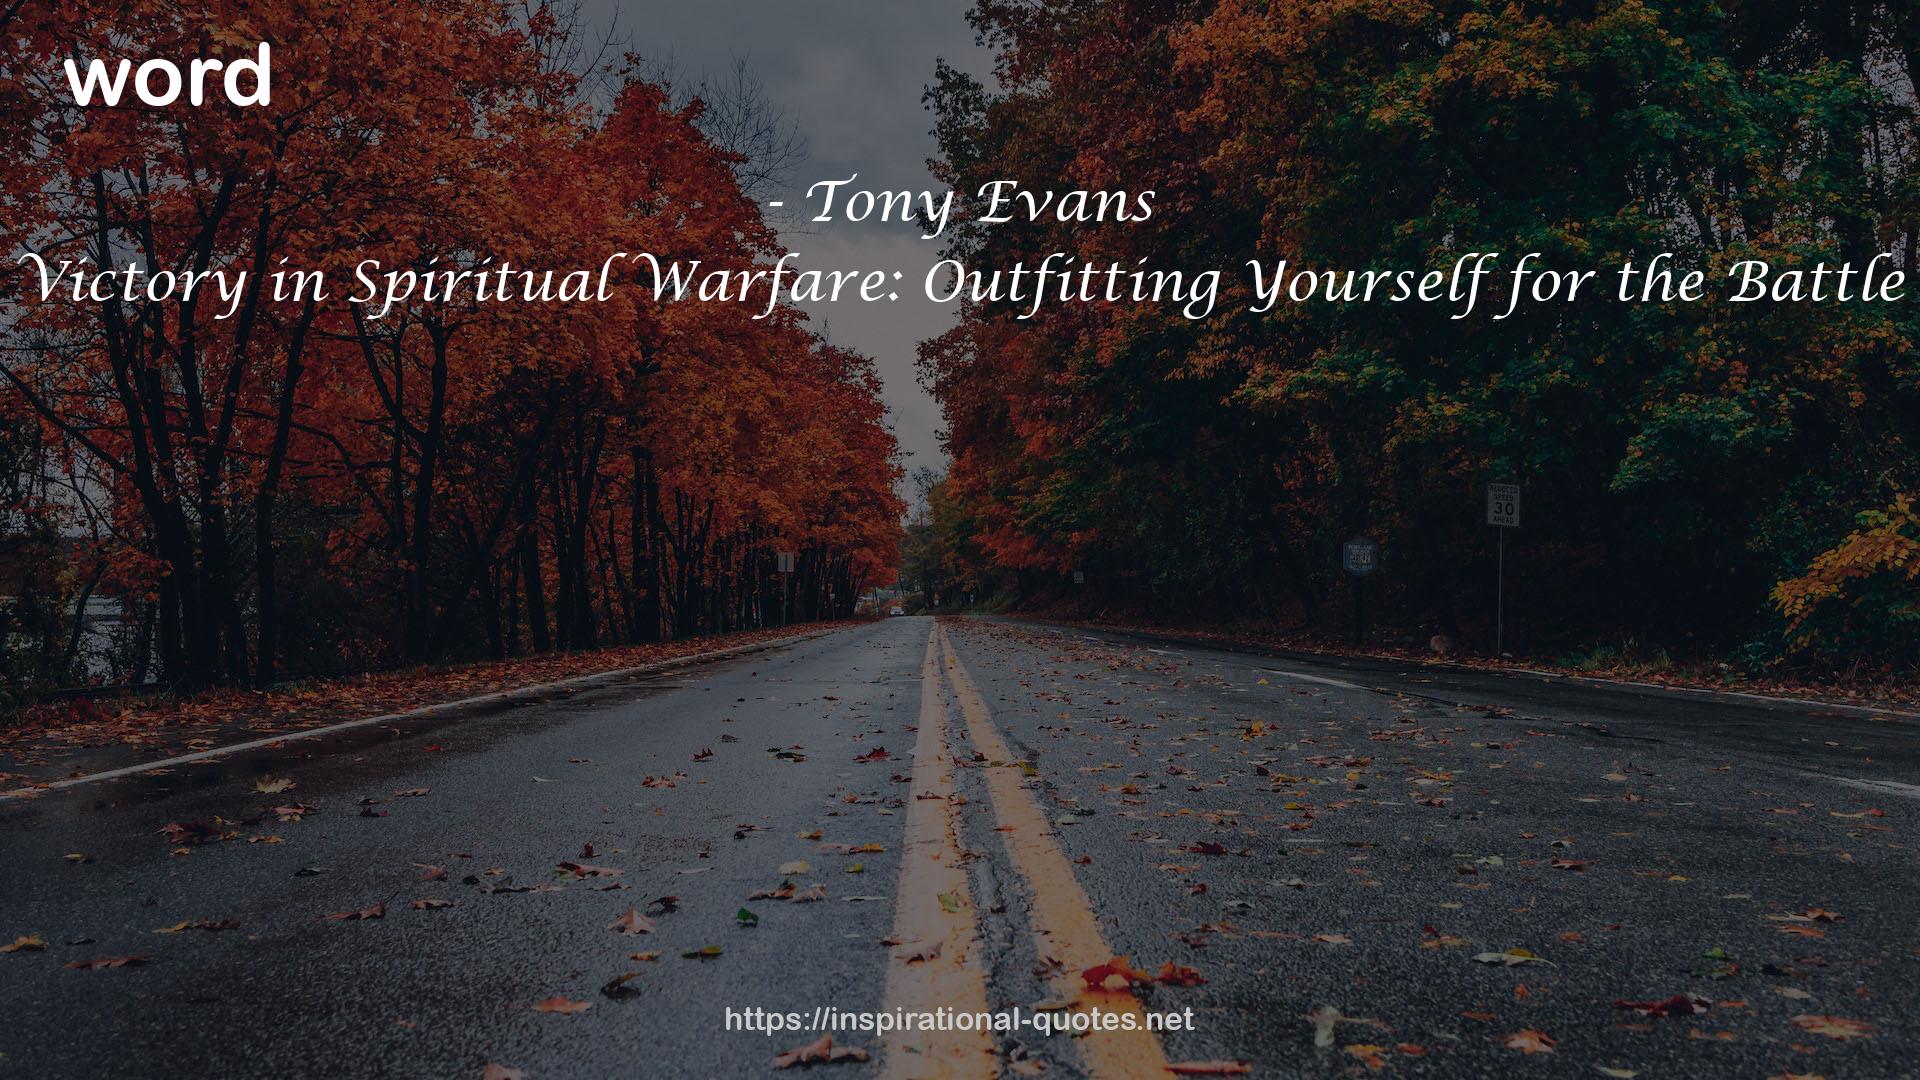 Victory in Spiritual Warfare: Outfitting Yourself for the Battle QUOTES